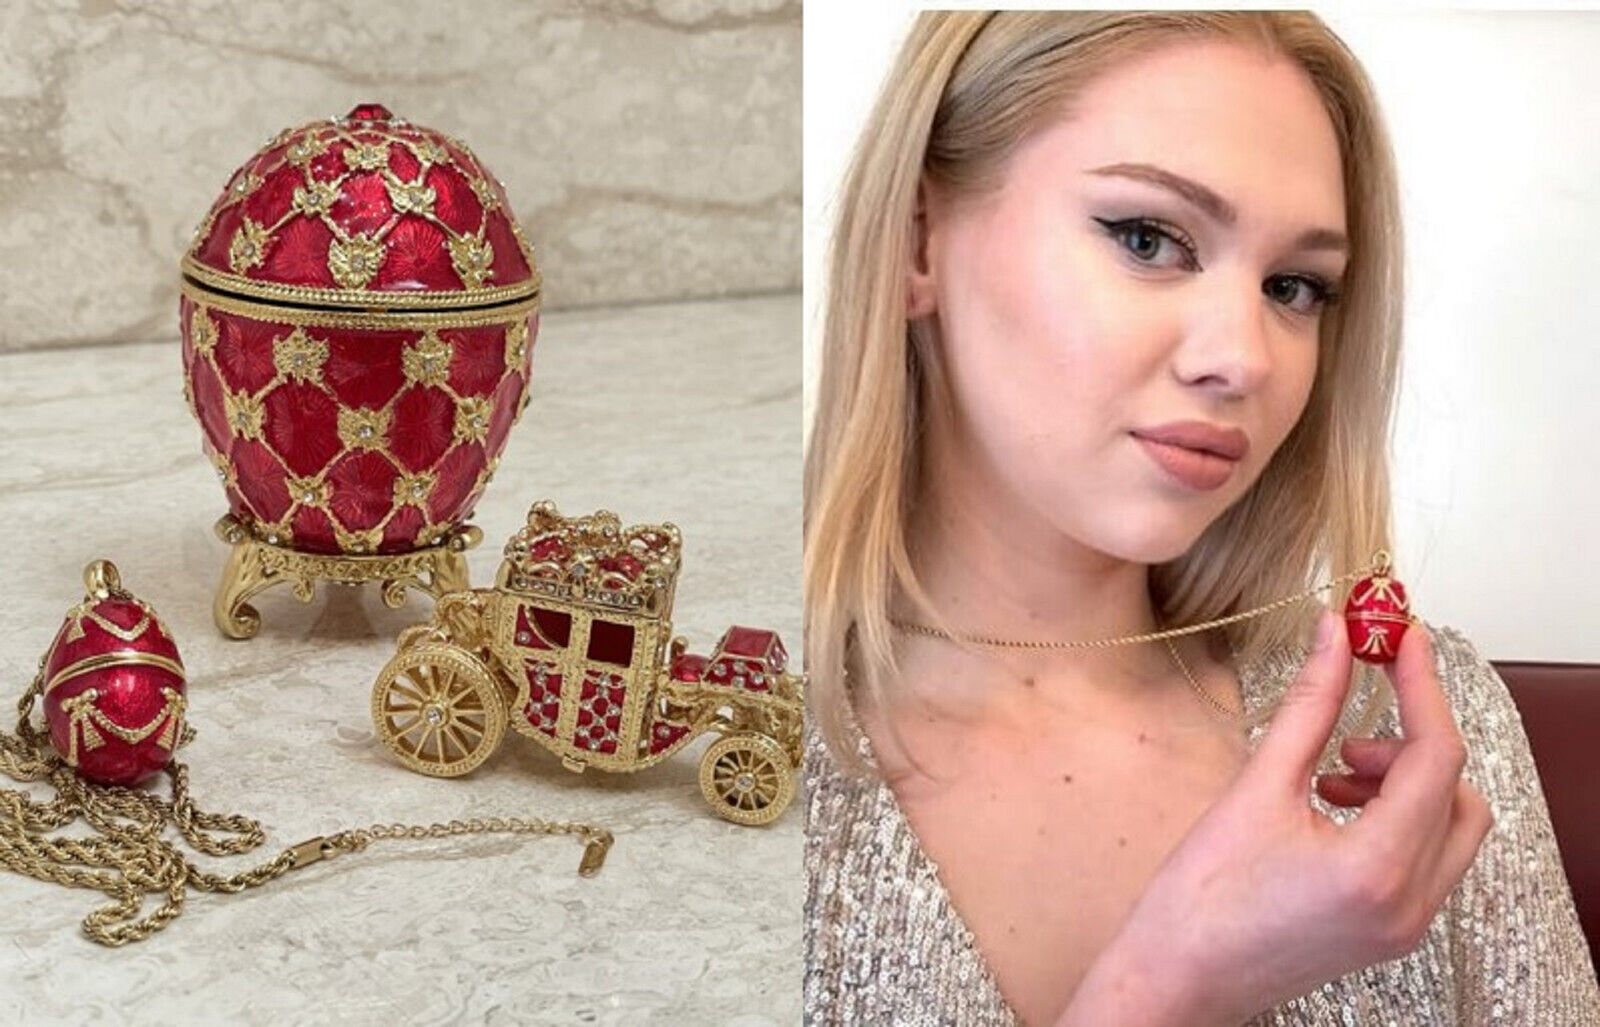 Ruby Imperial Faberge egg Trinket  & Faberge Necklace Daughter Graduation gift